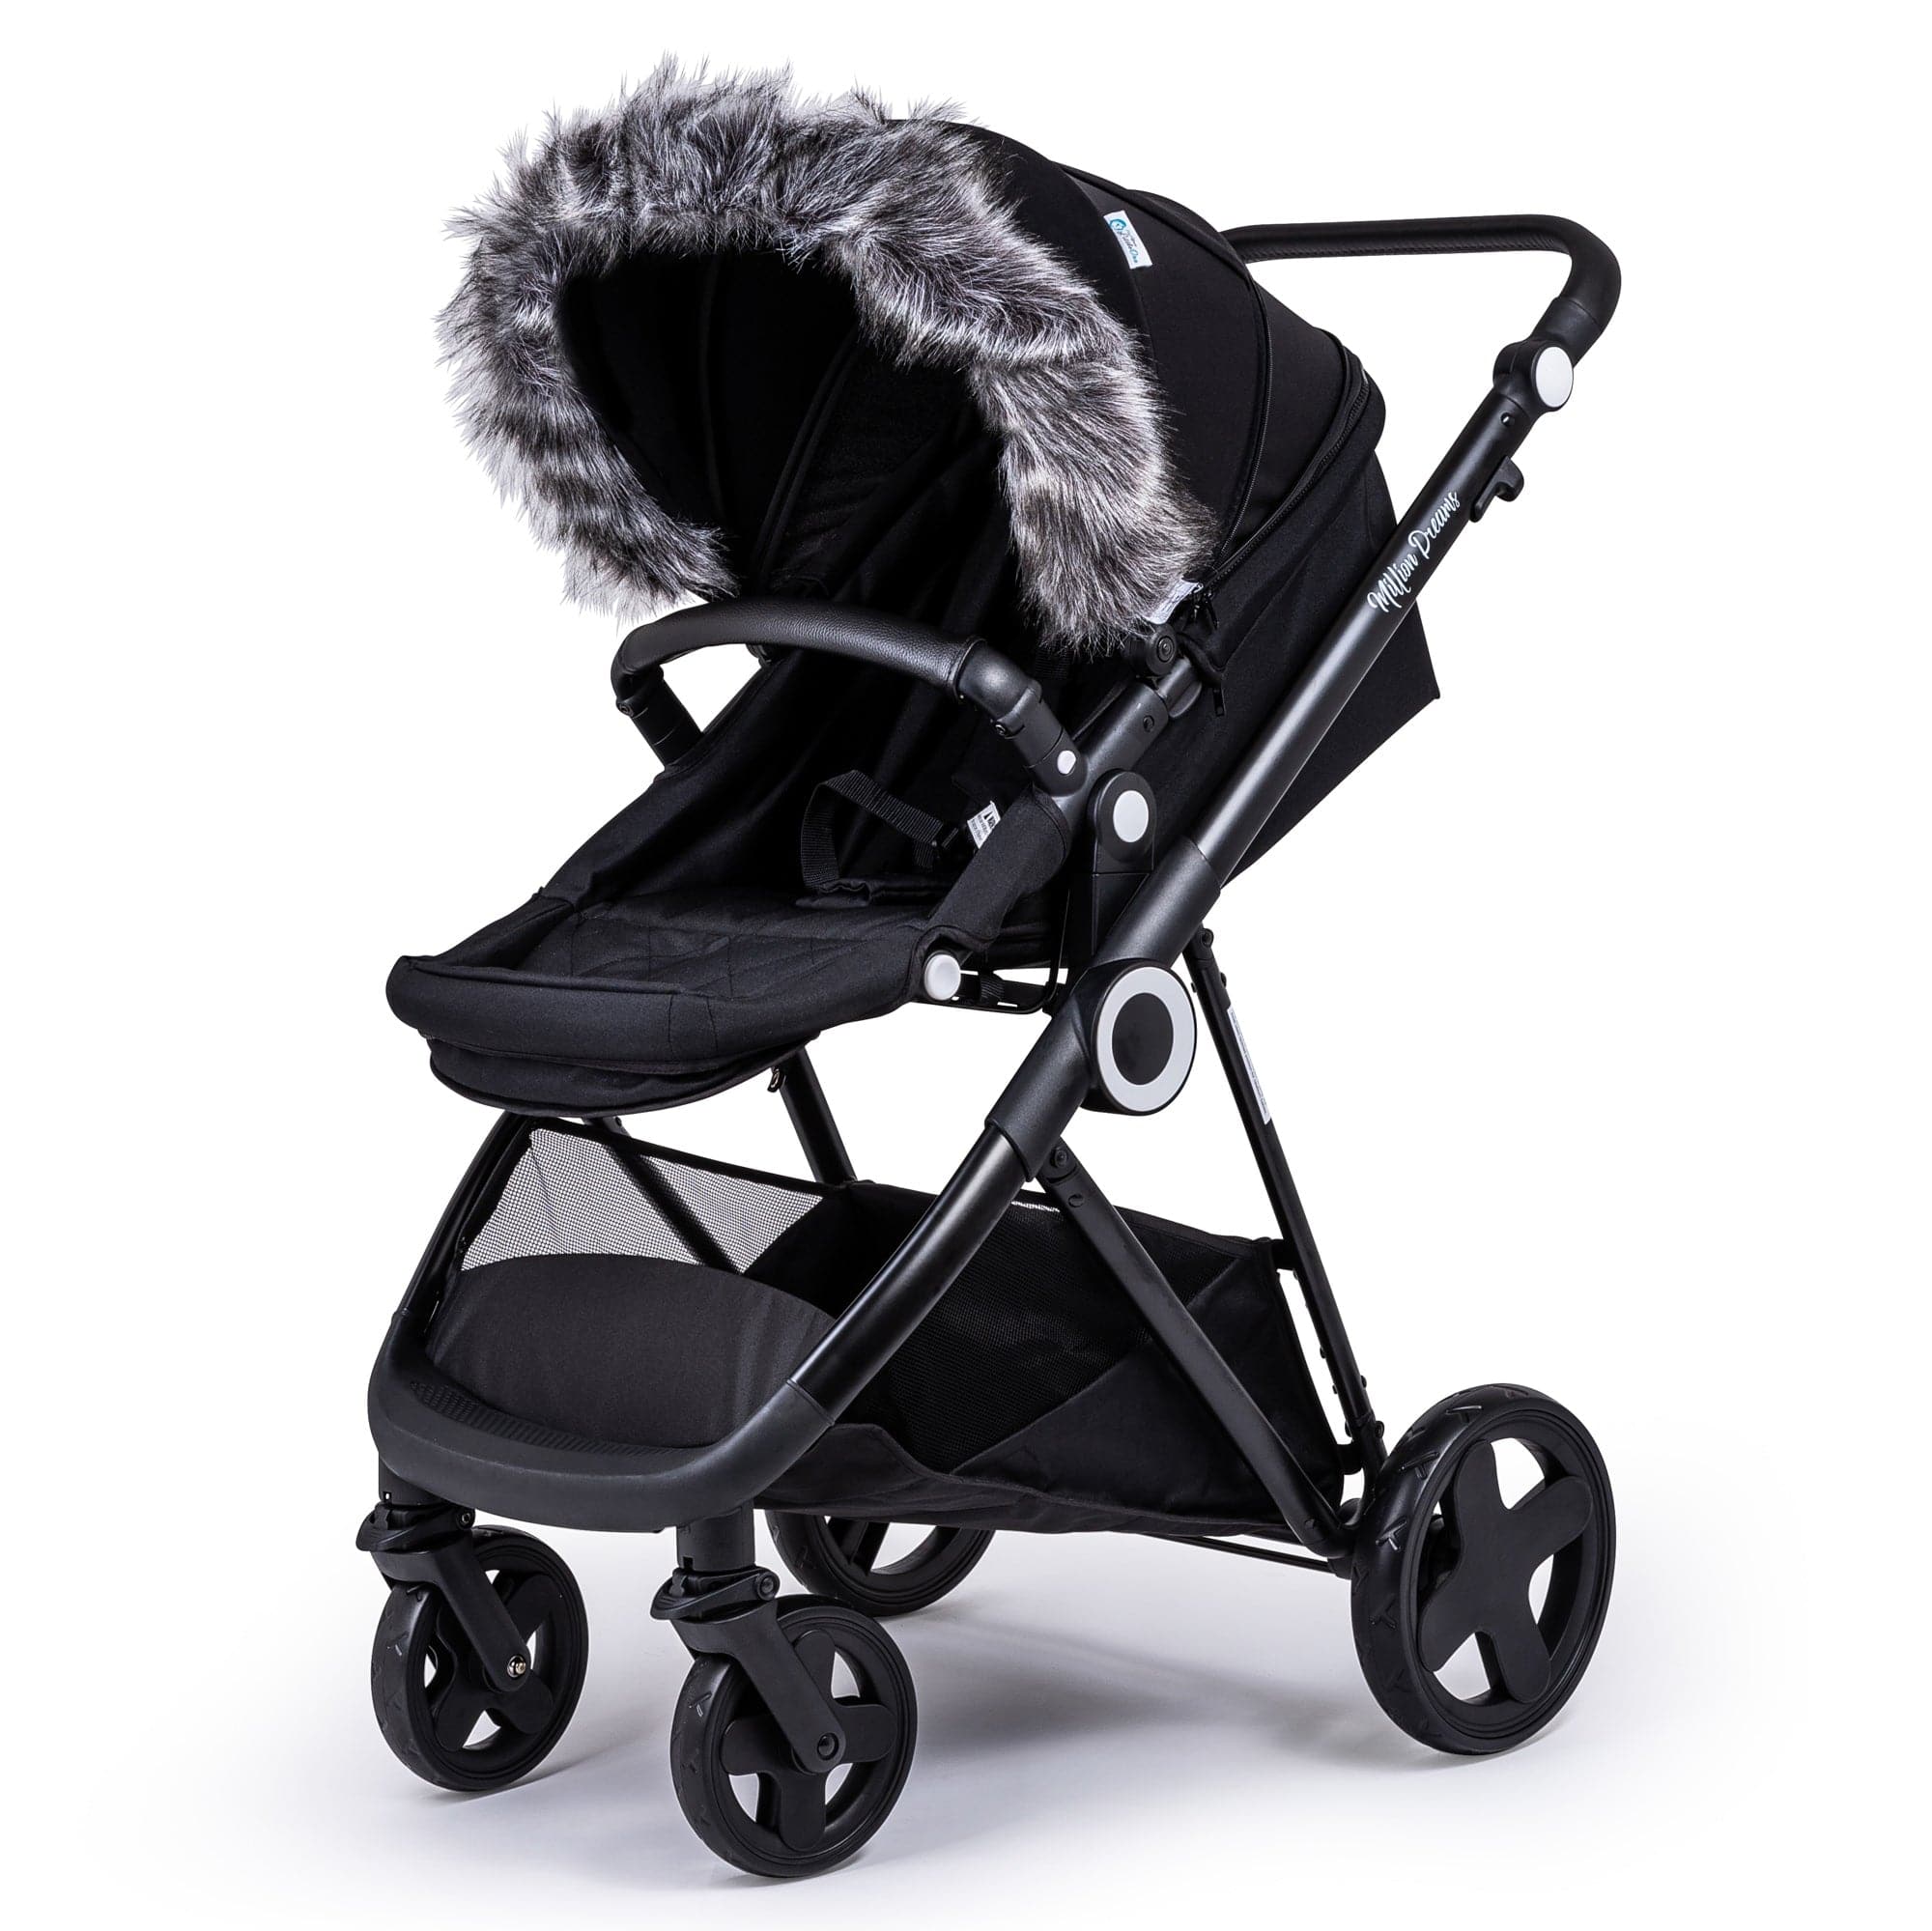 Pram Fur Hood Trim Attachment For Pushchair Compatible with Diono - Dark Grey / Fits All Models | For Your Little One